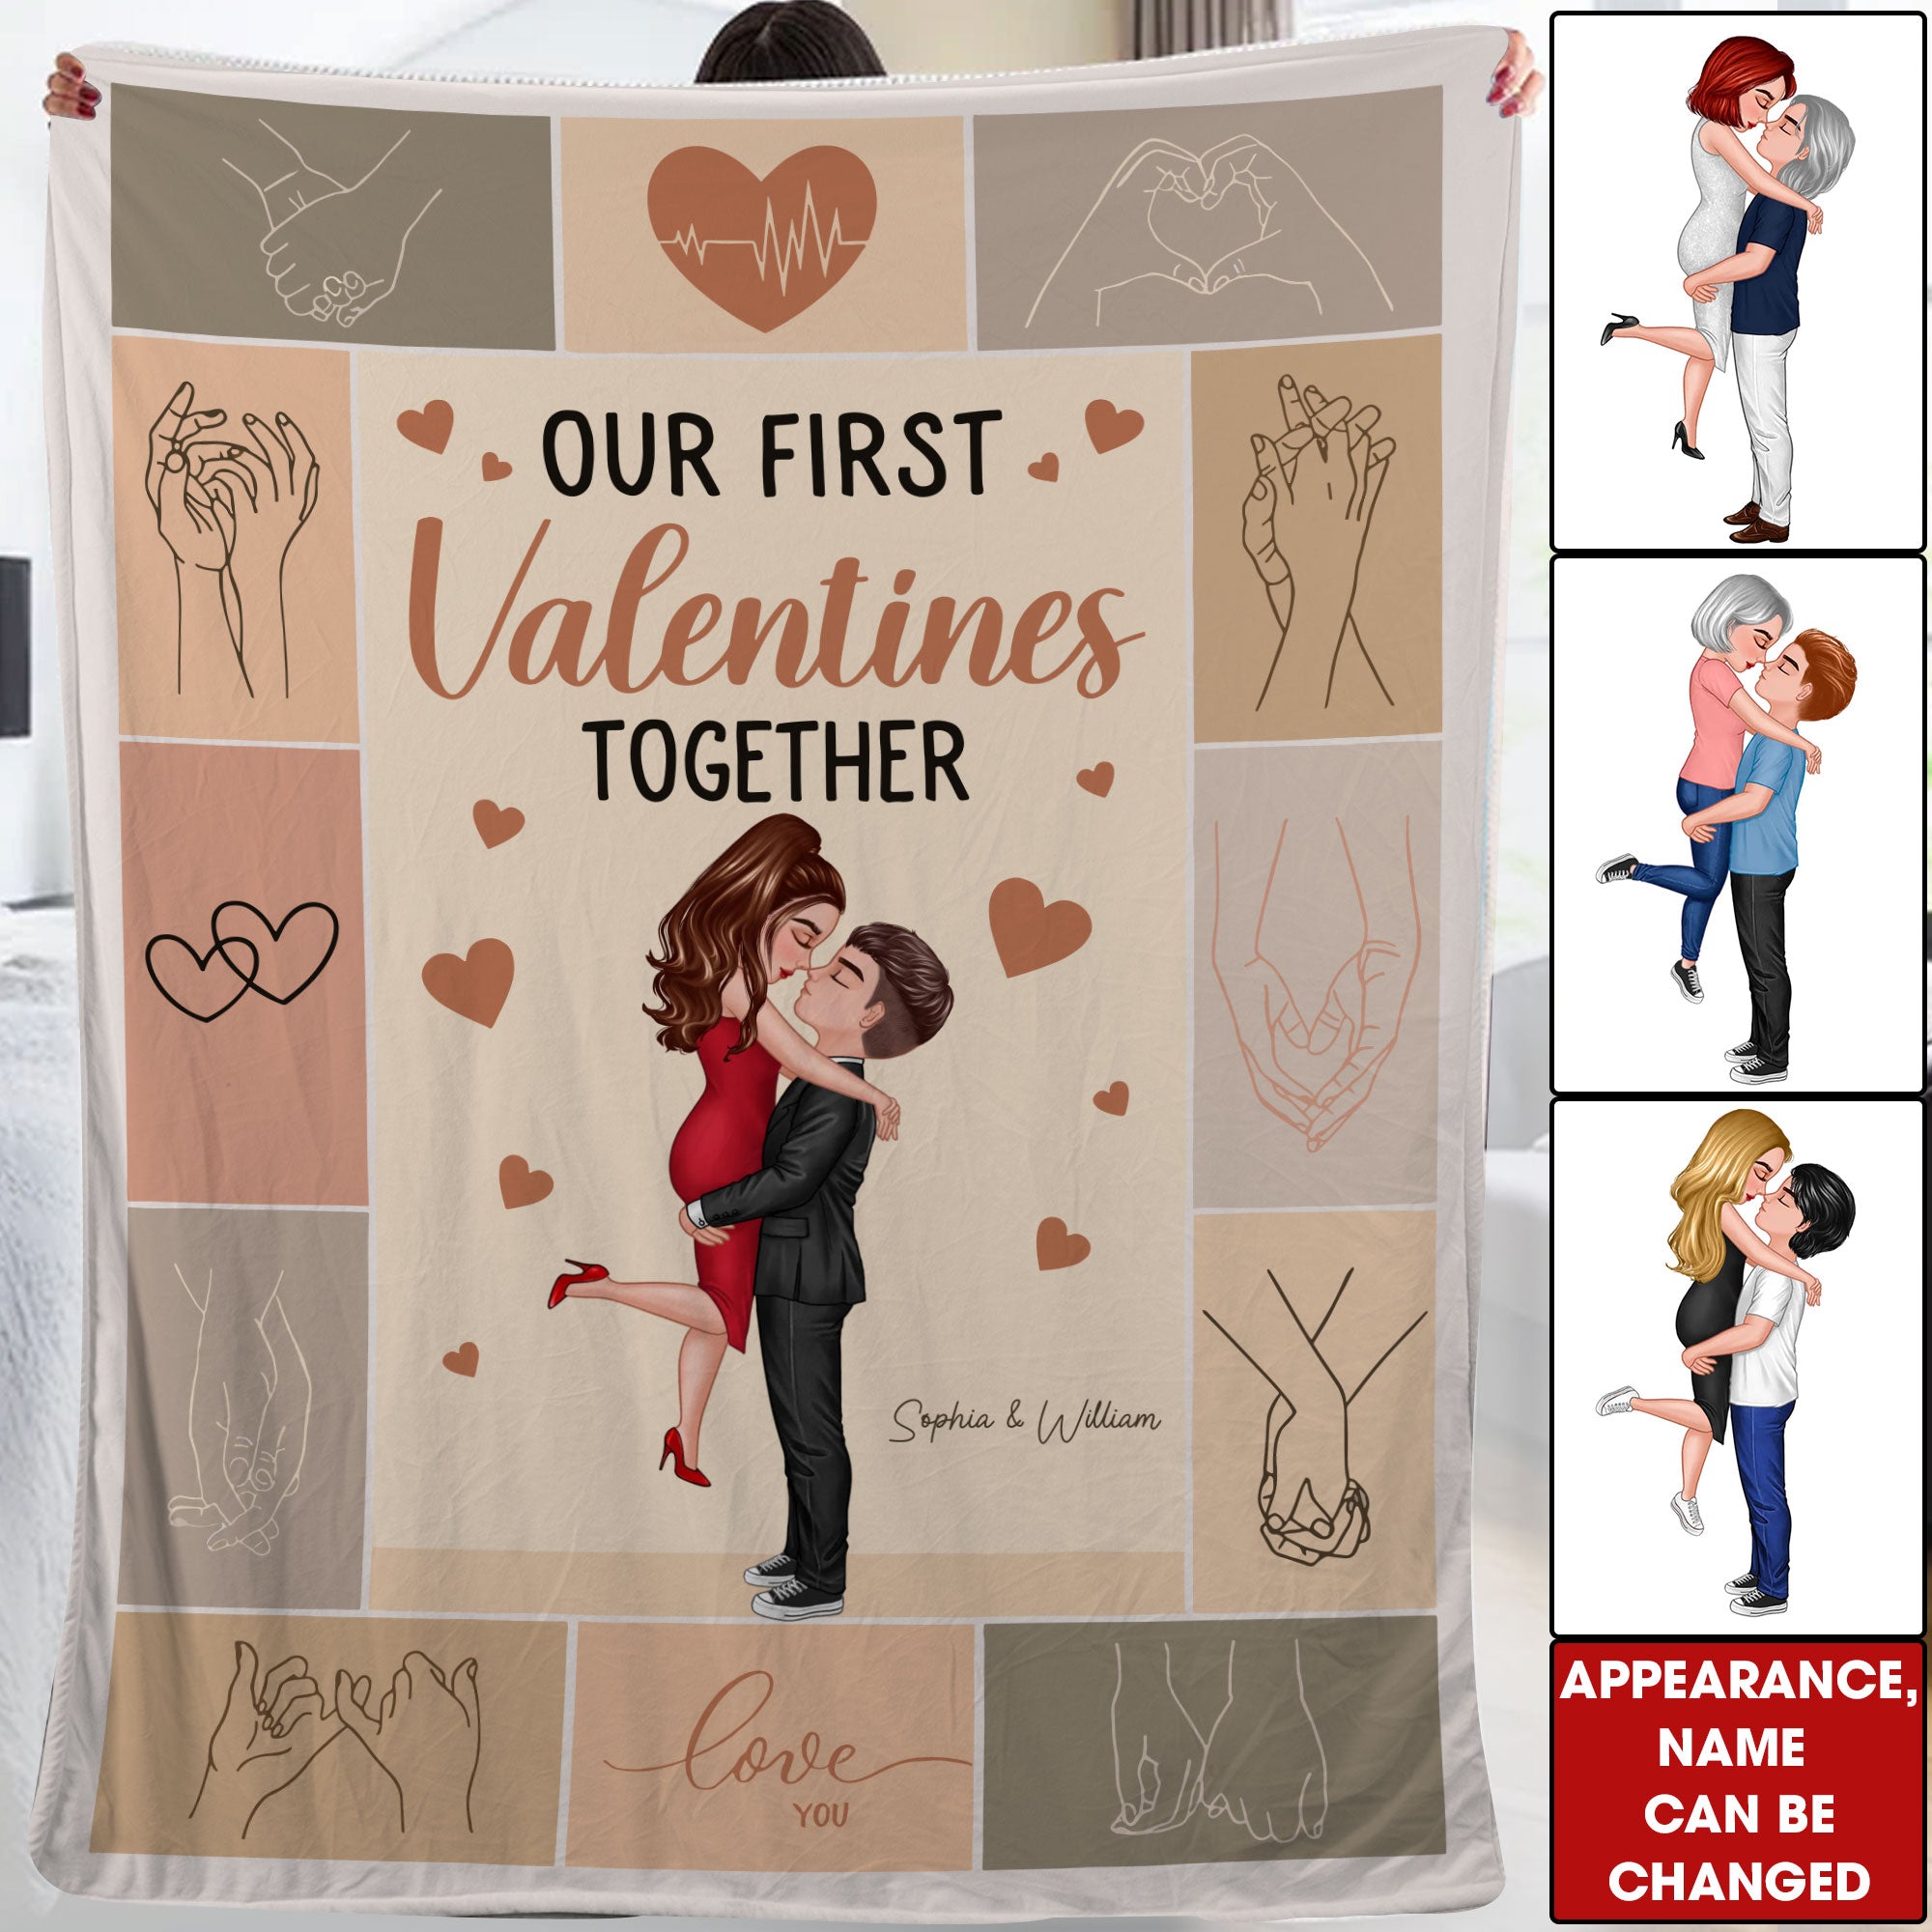 Our First Valentines Together - Custom Couple Appearances And Names - Personalized Fleece Blanket